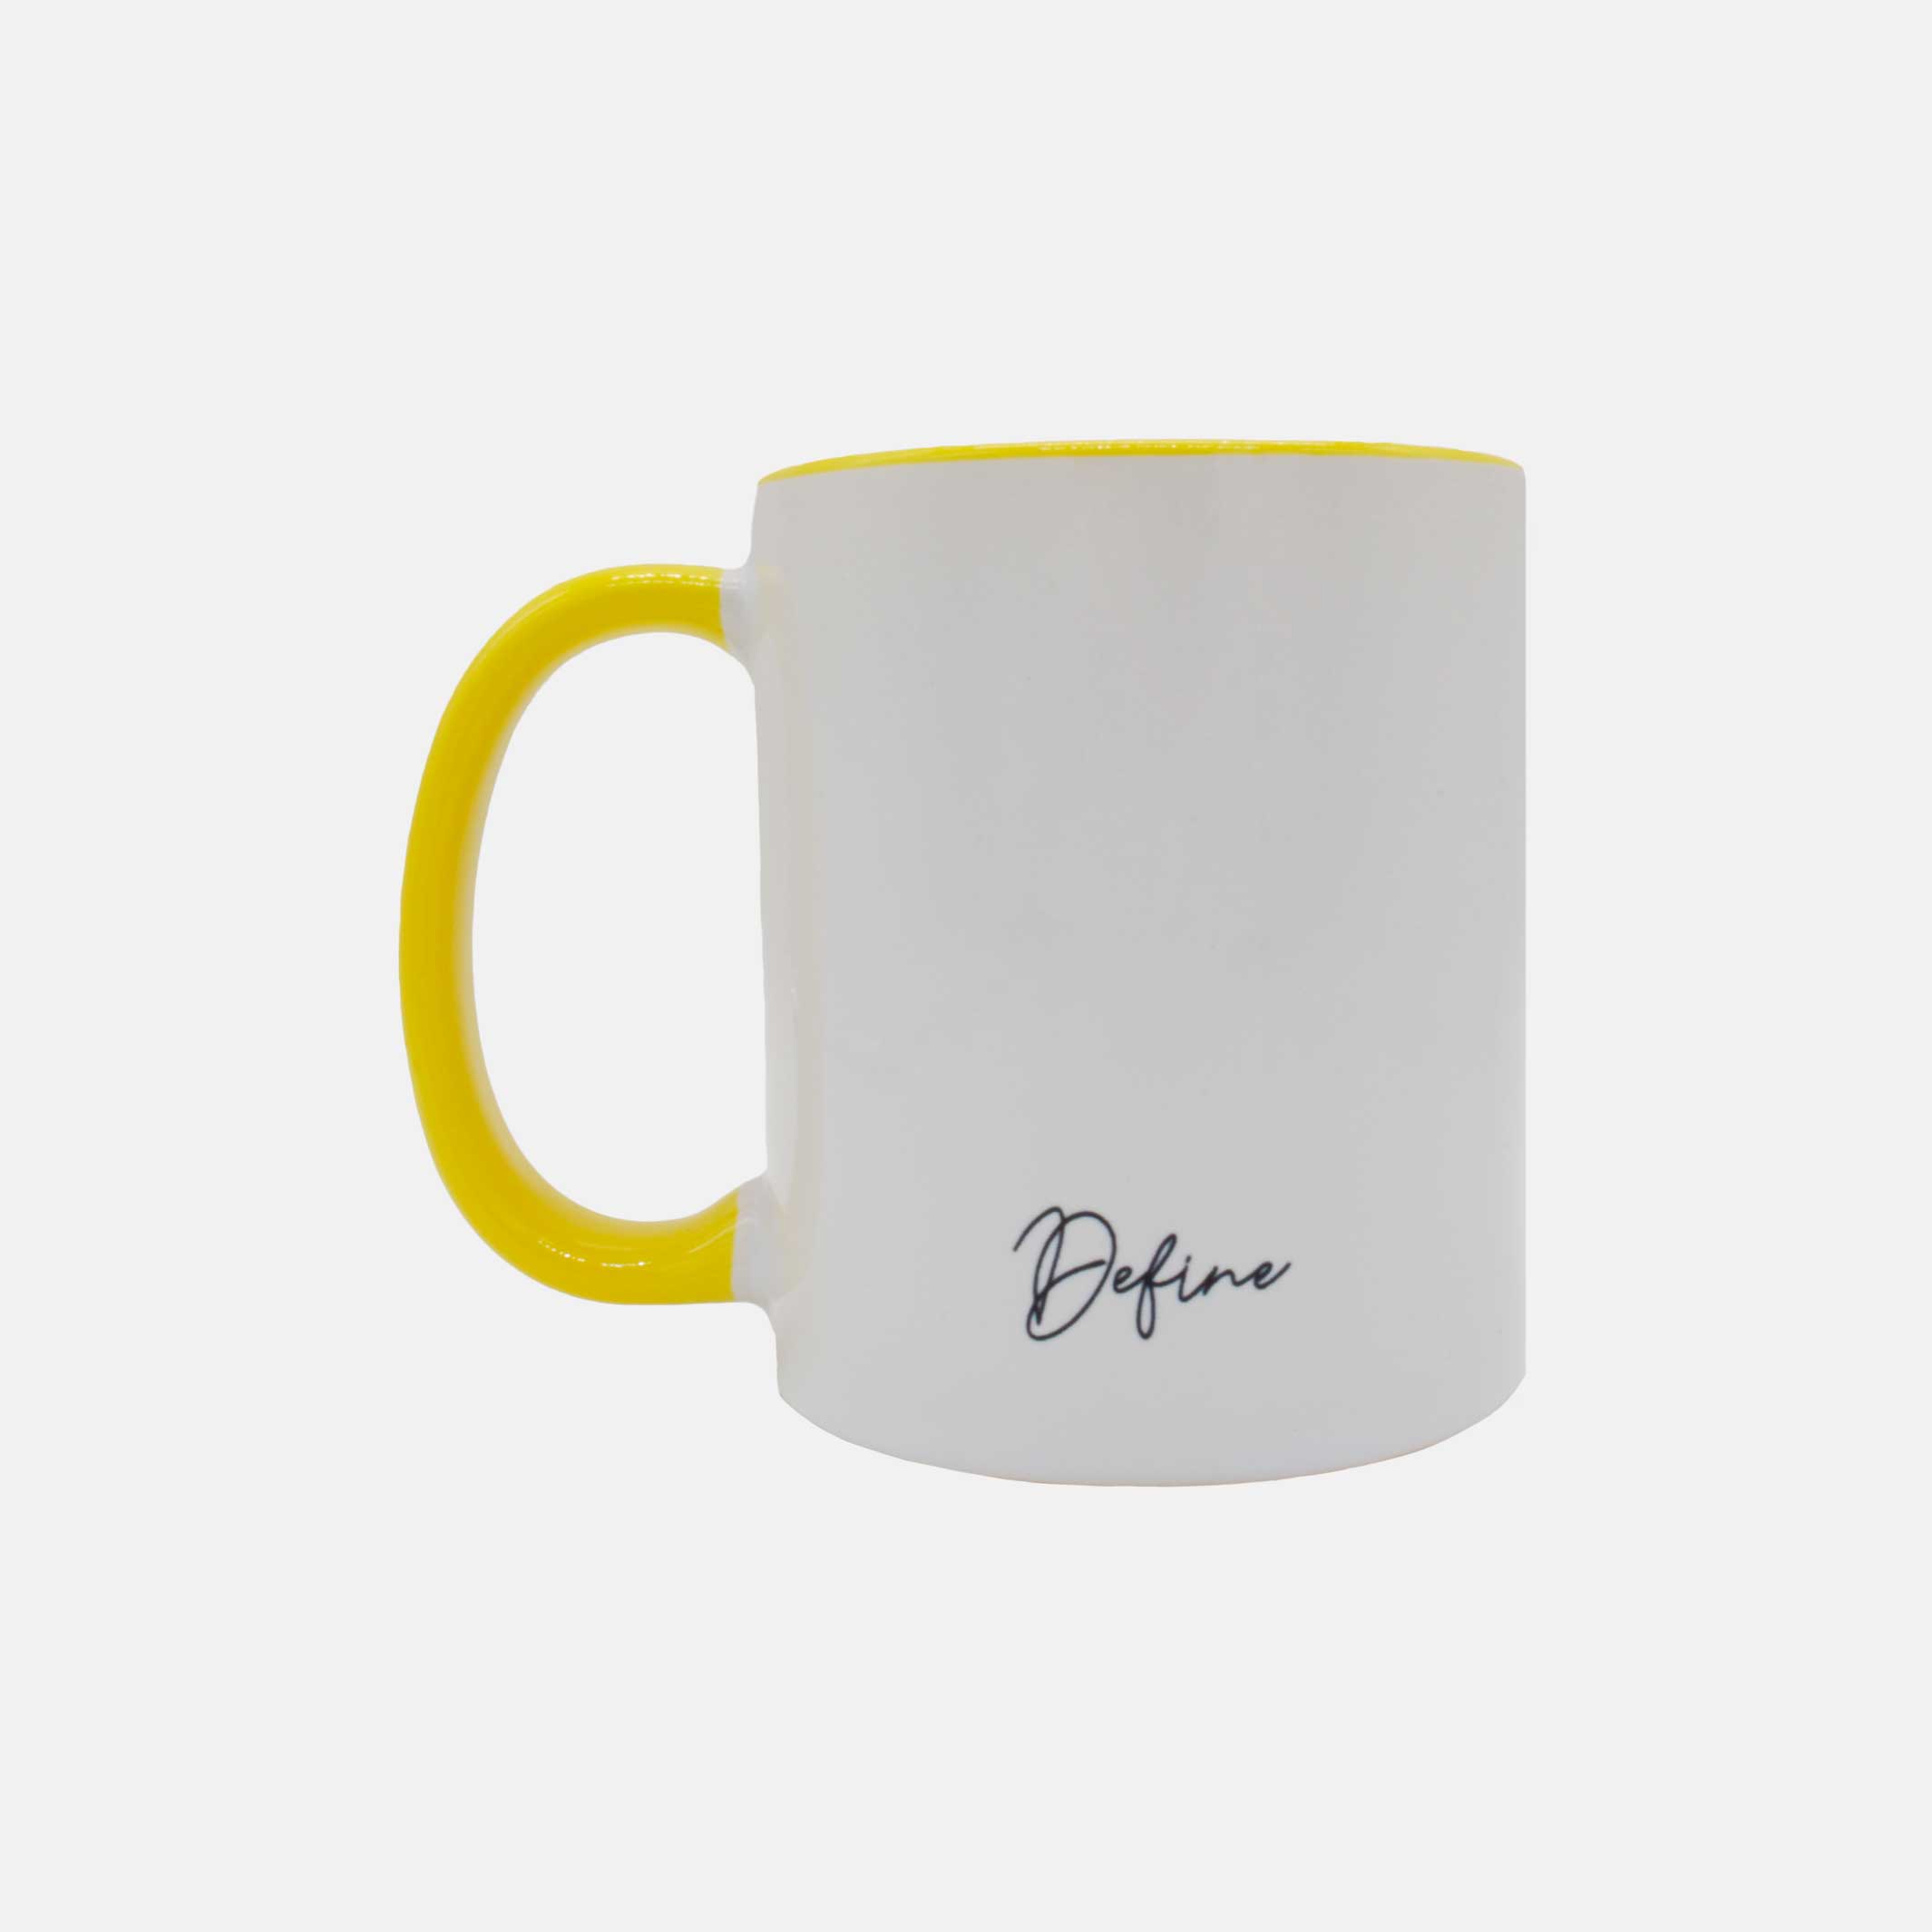 Back of the white mug with yellow handle. Printed on the bottom is the company's name "Define". #color_yellow